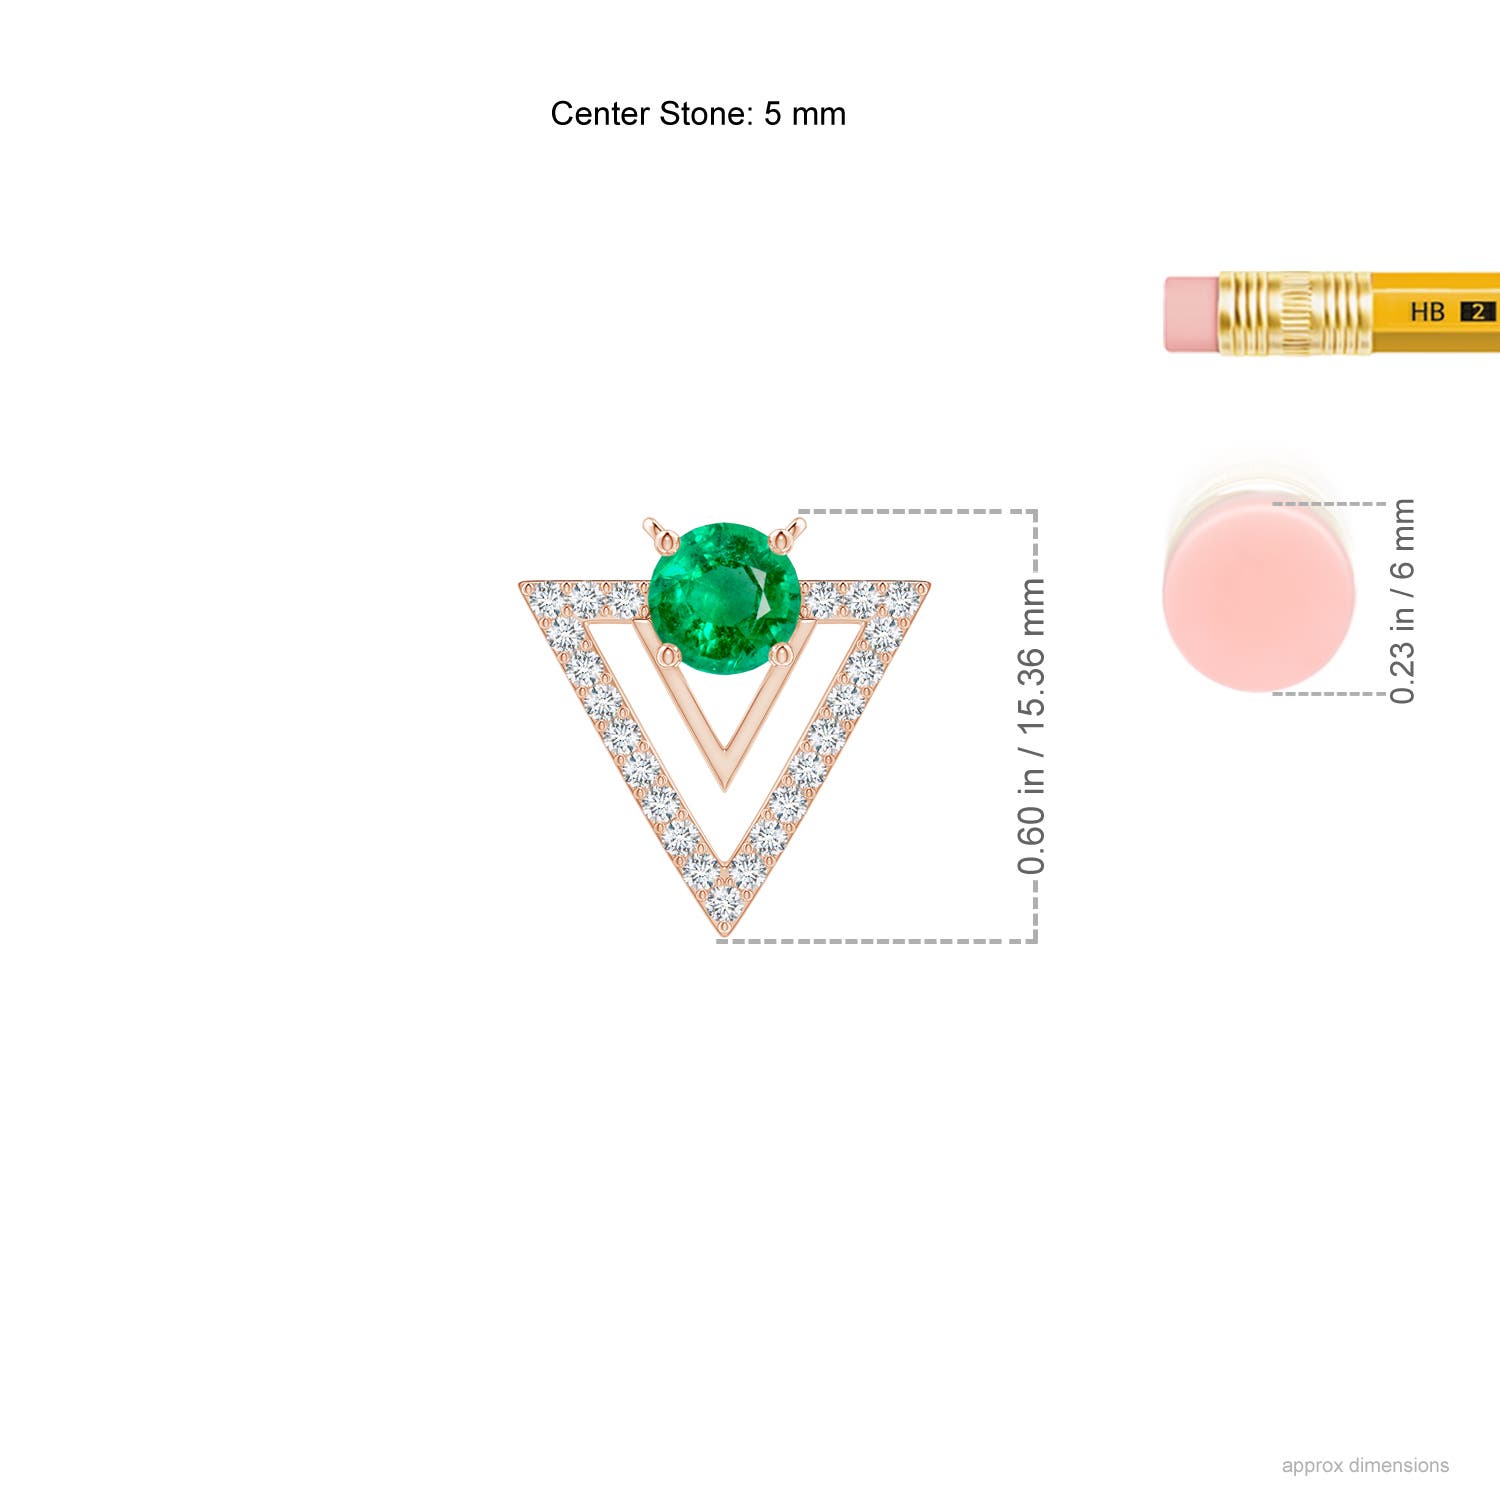 AAA - Emerald / 0.63 CT / 14 KT Rose Gold